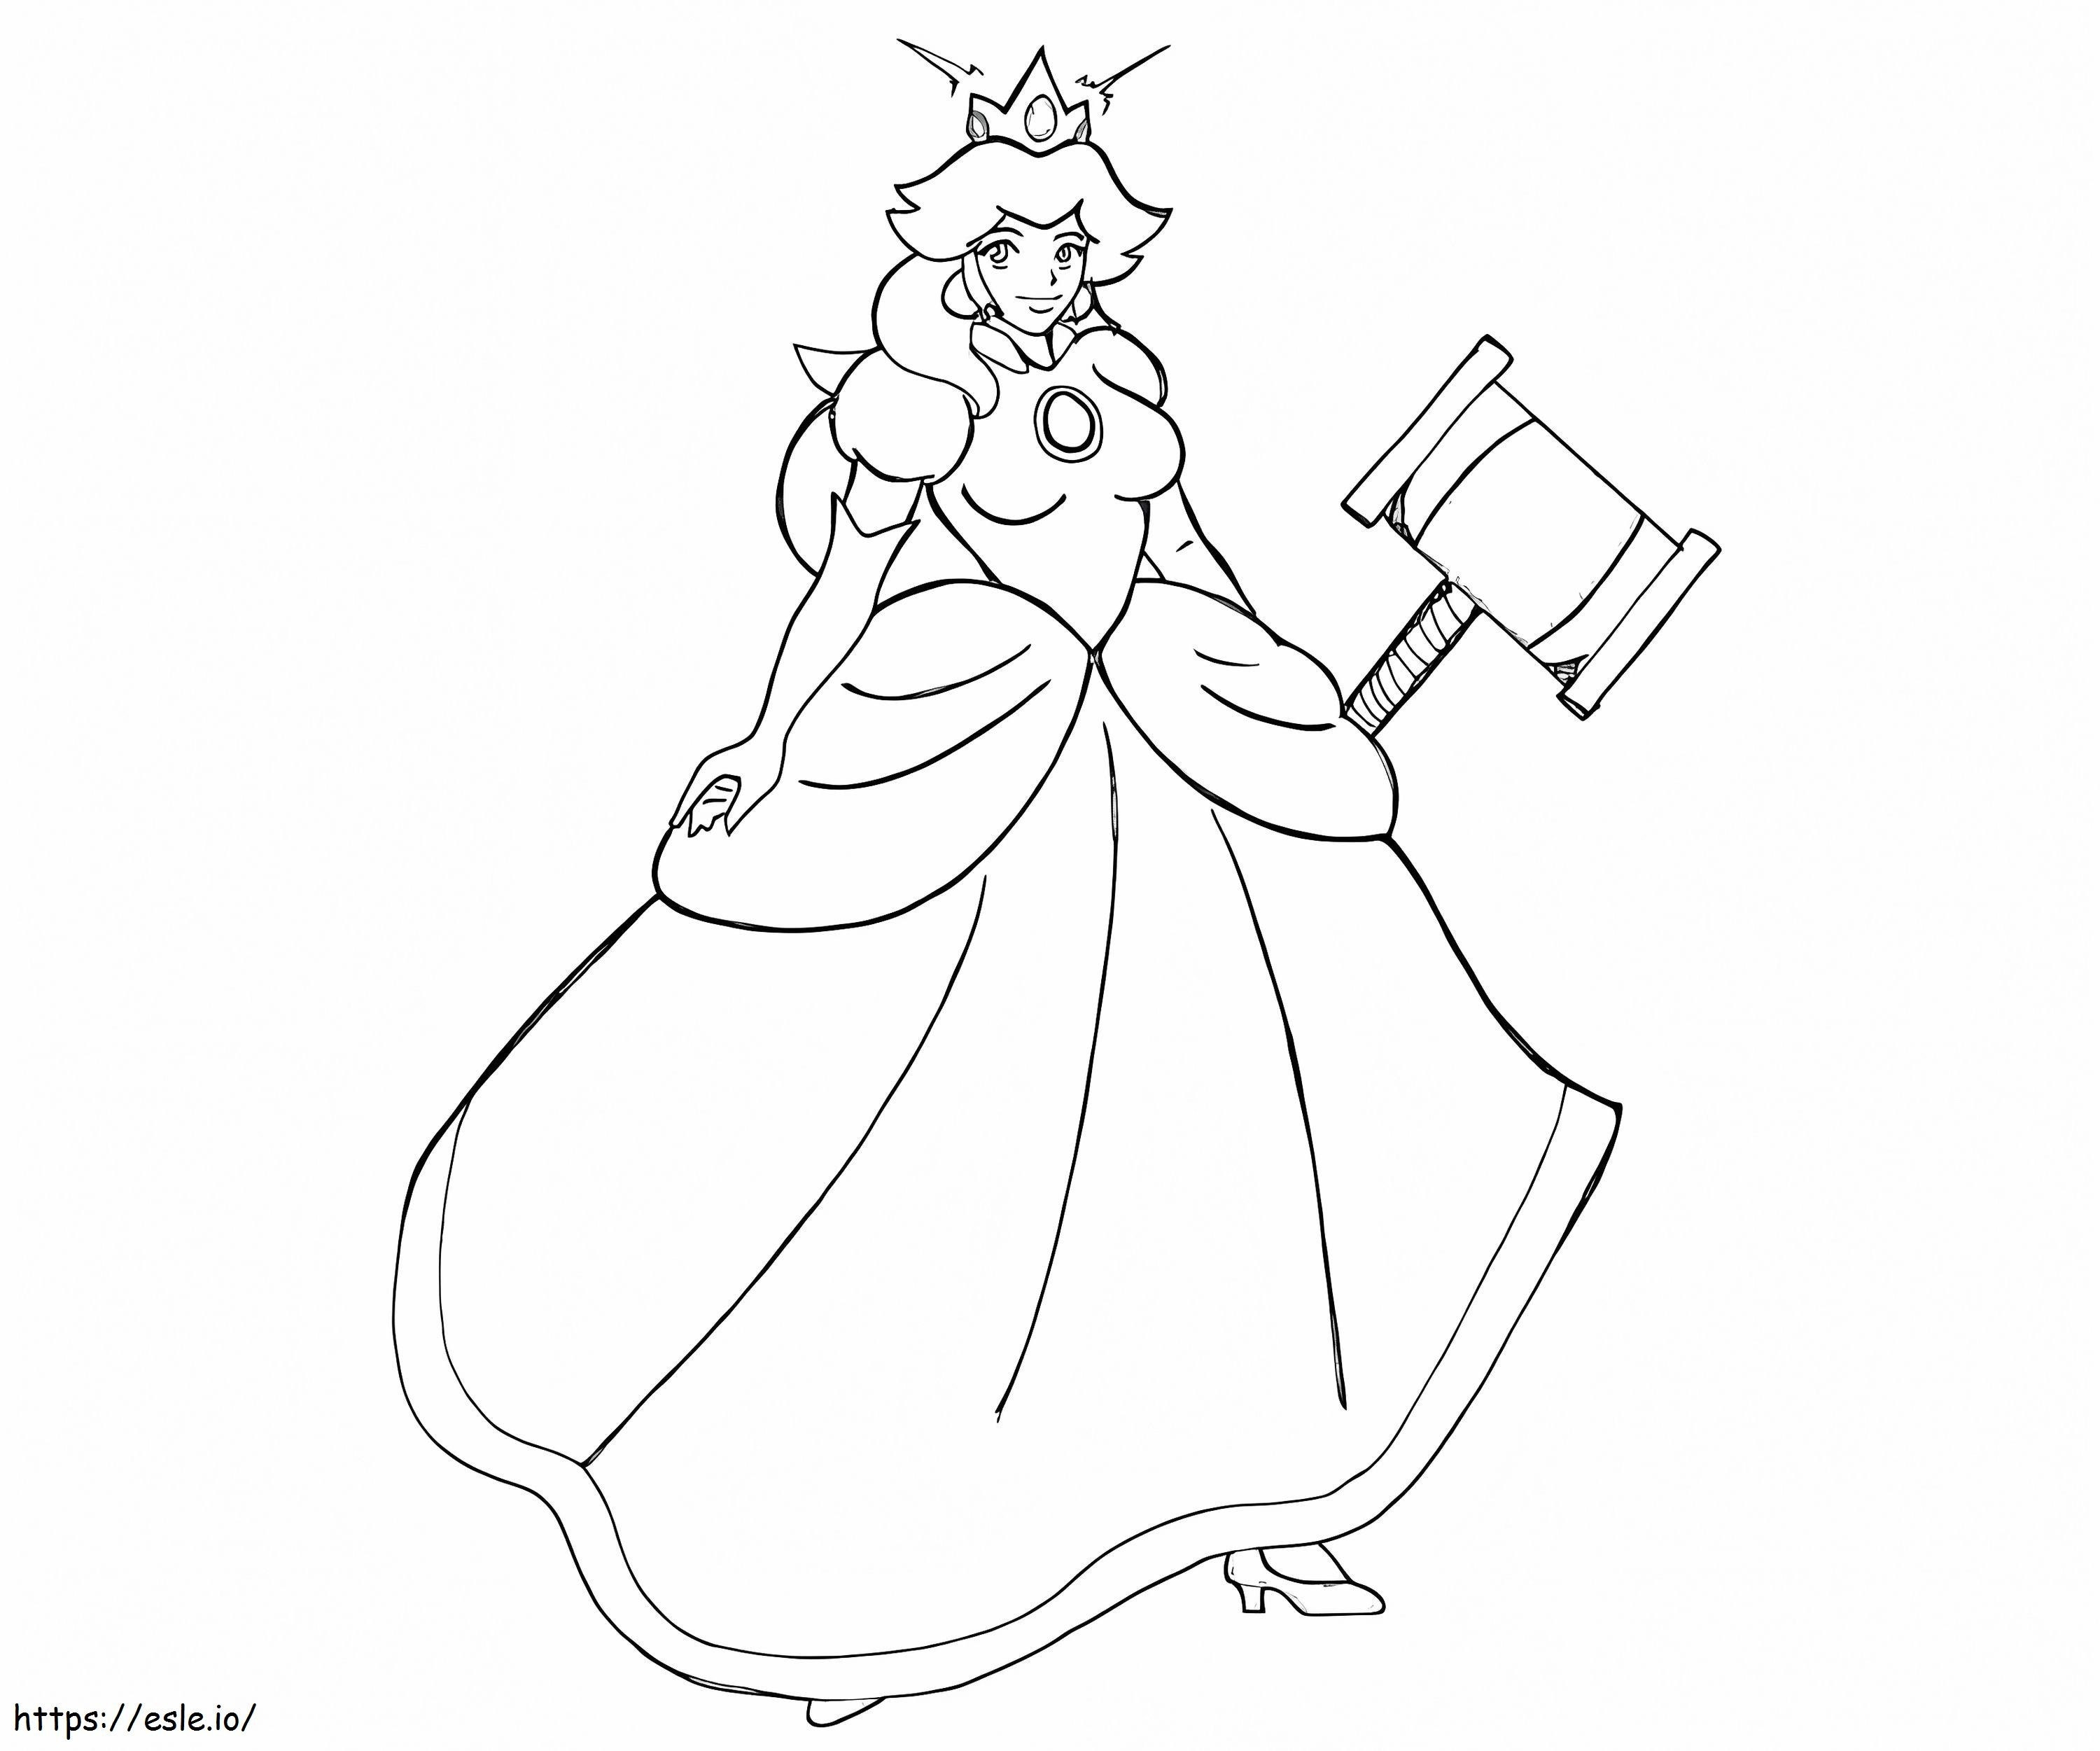 Smiling Princess Peach Holding A Hammer coloring page